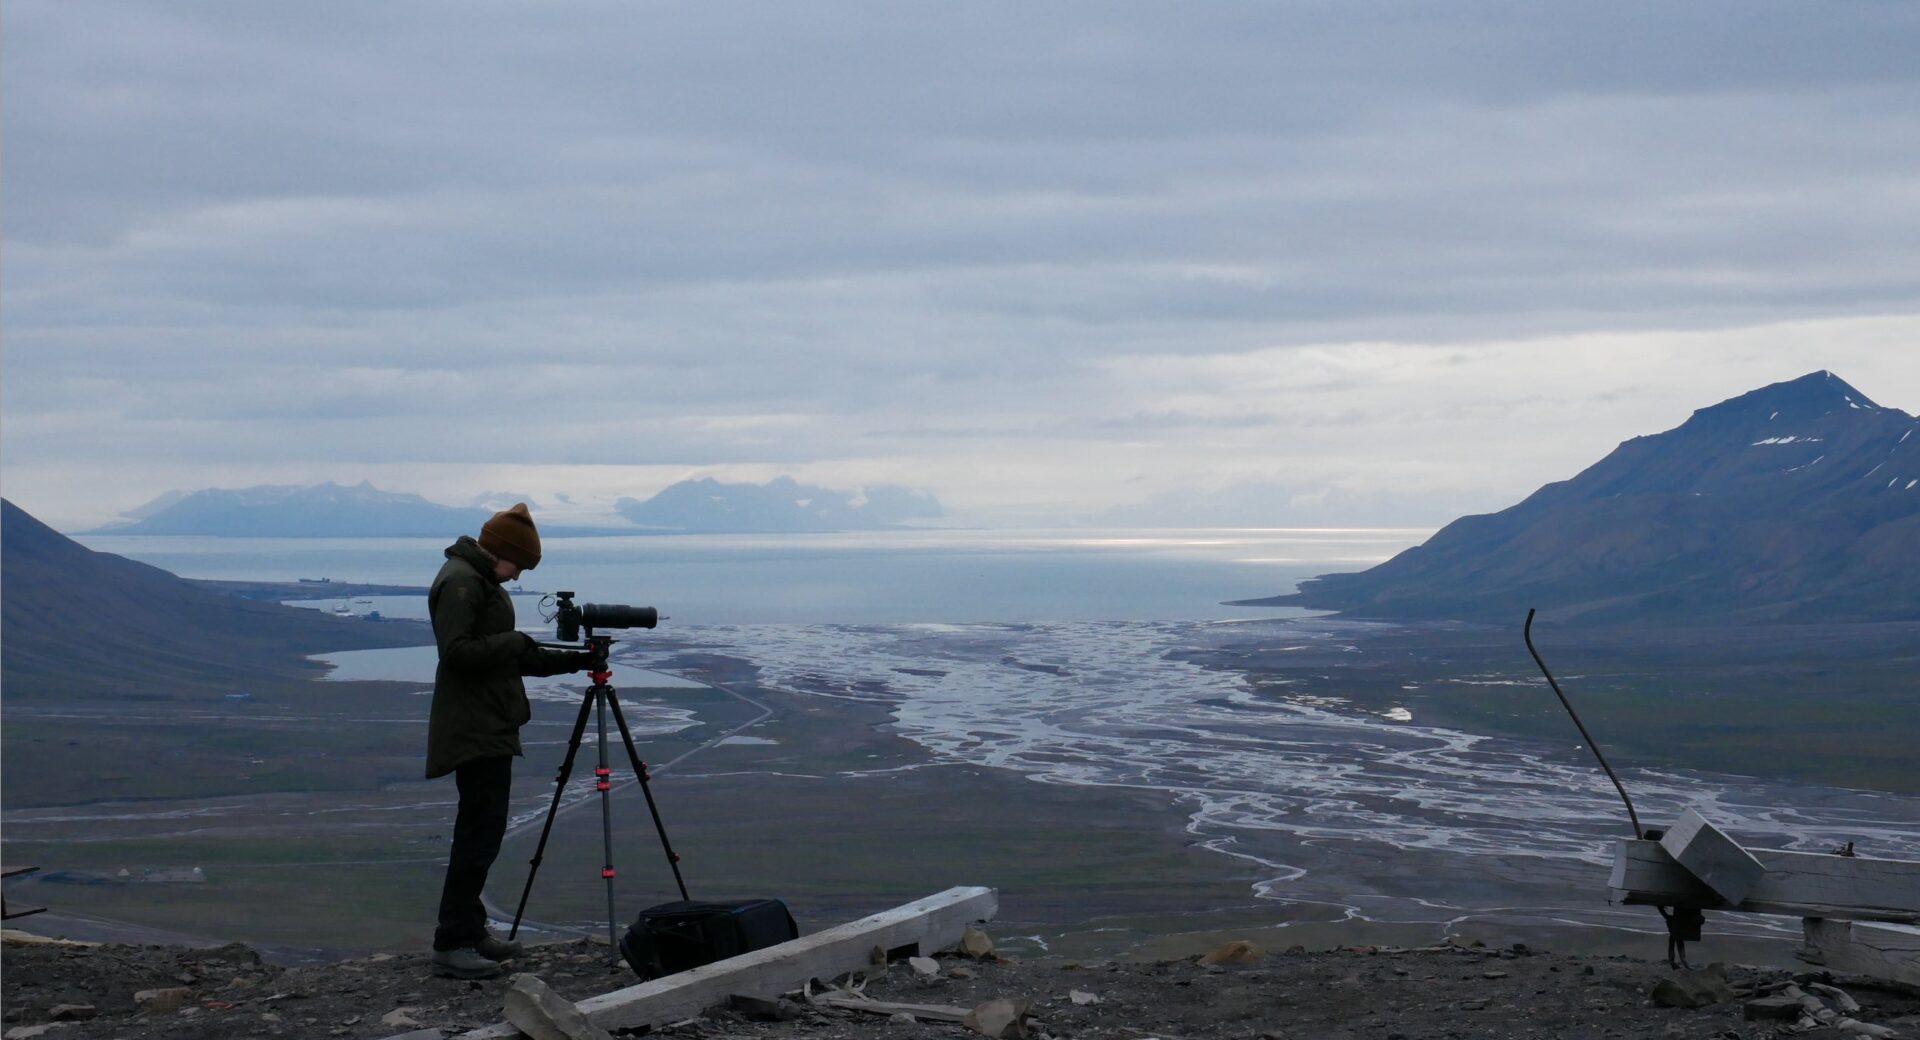 Solway to Svalbard – A journey of discovery